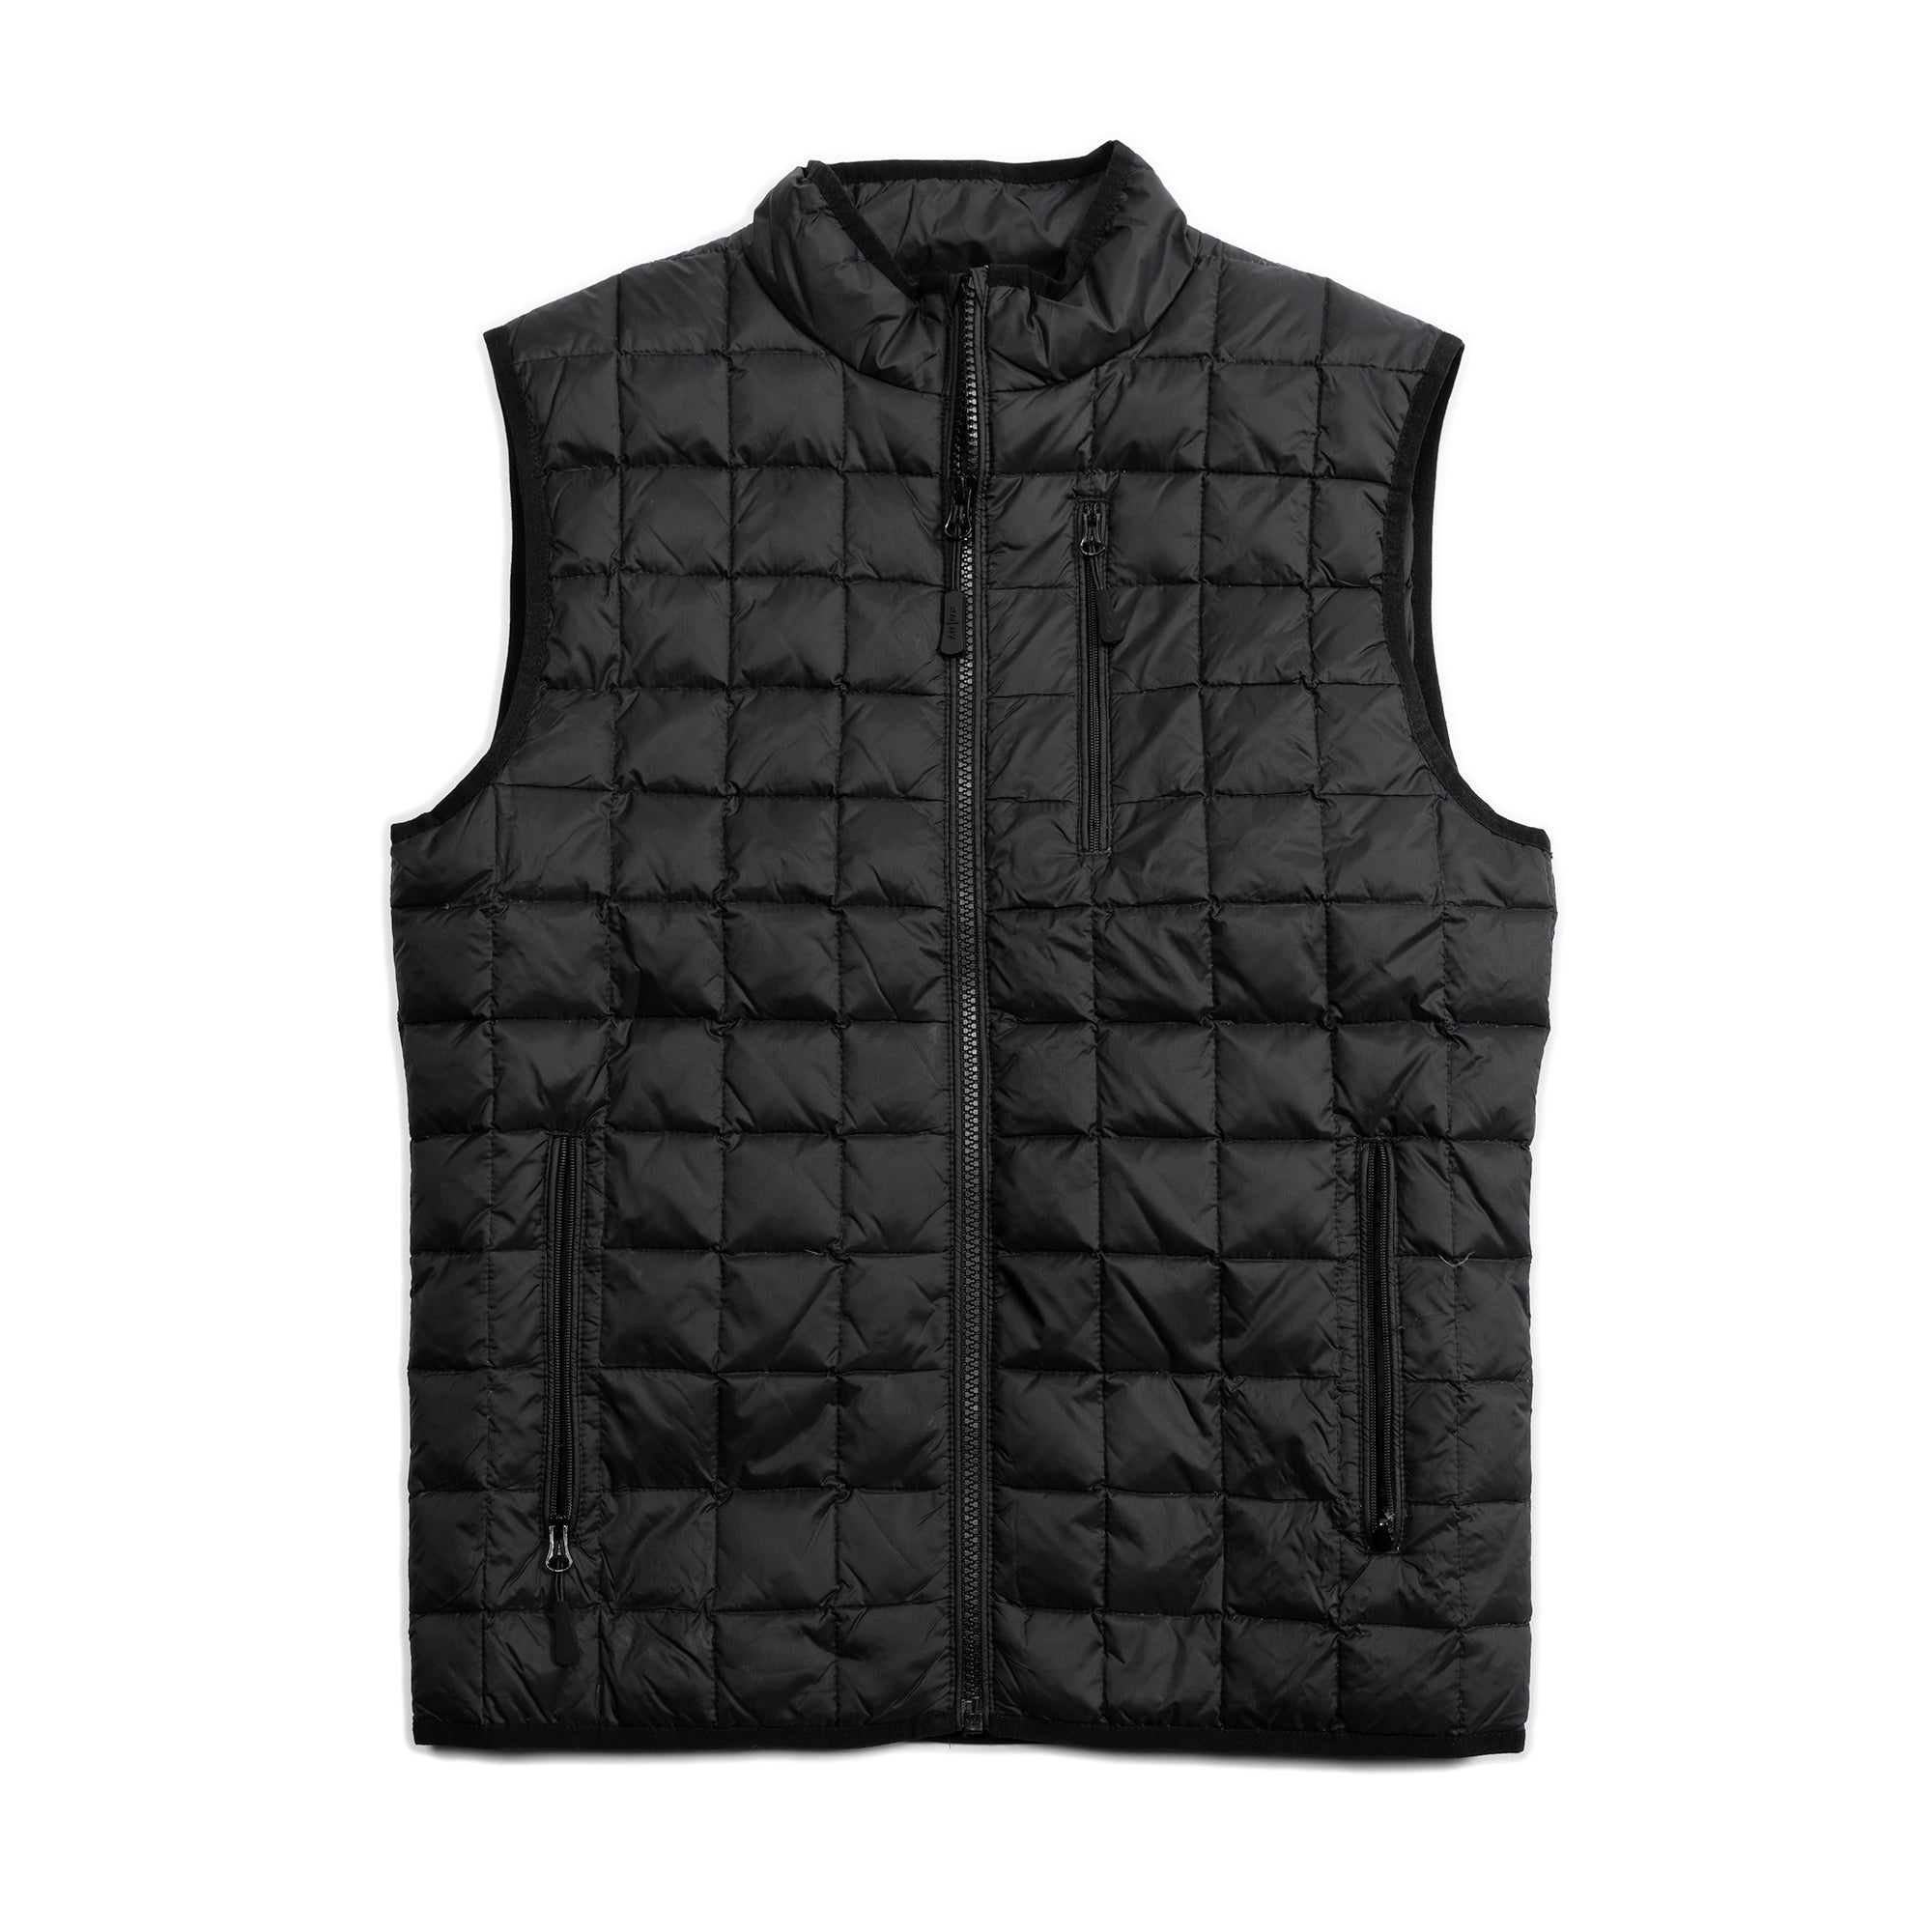 How to Wear a Lightweight Vest  Peter Manning NYC – Peter Manning